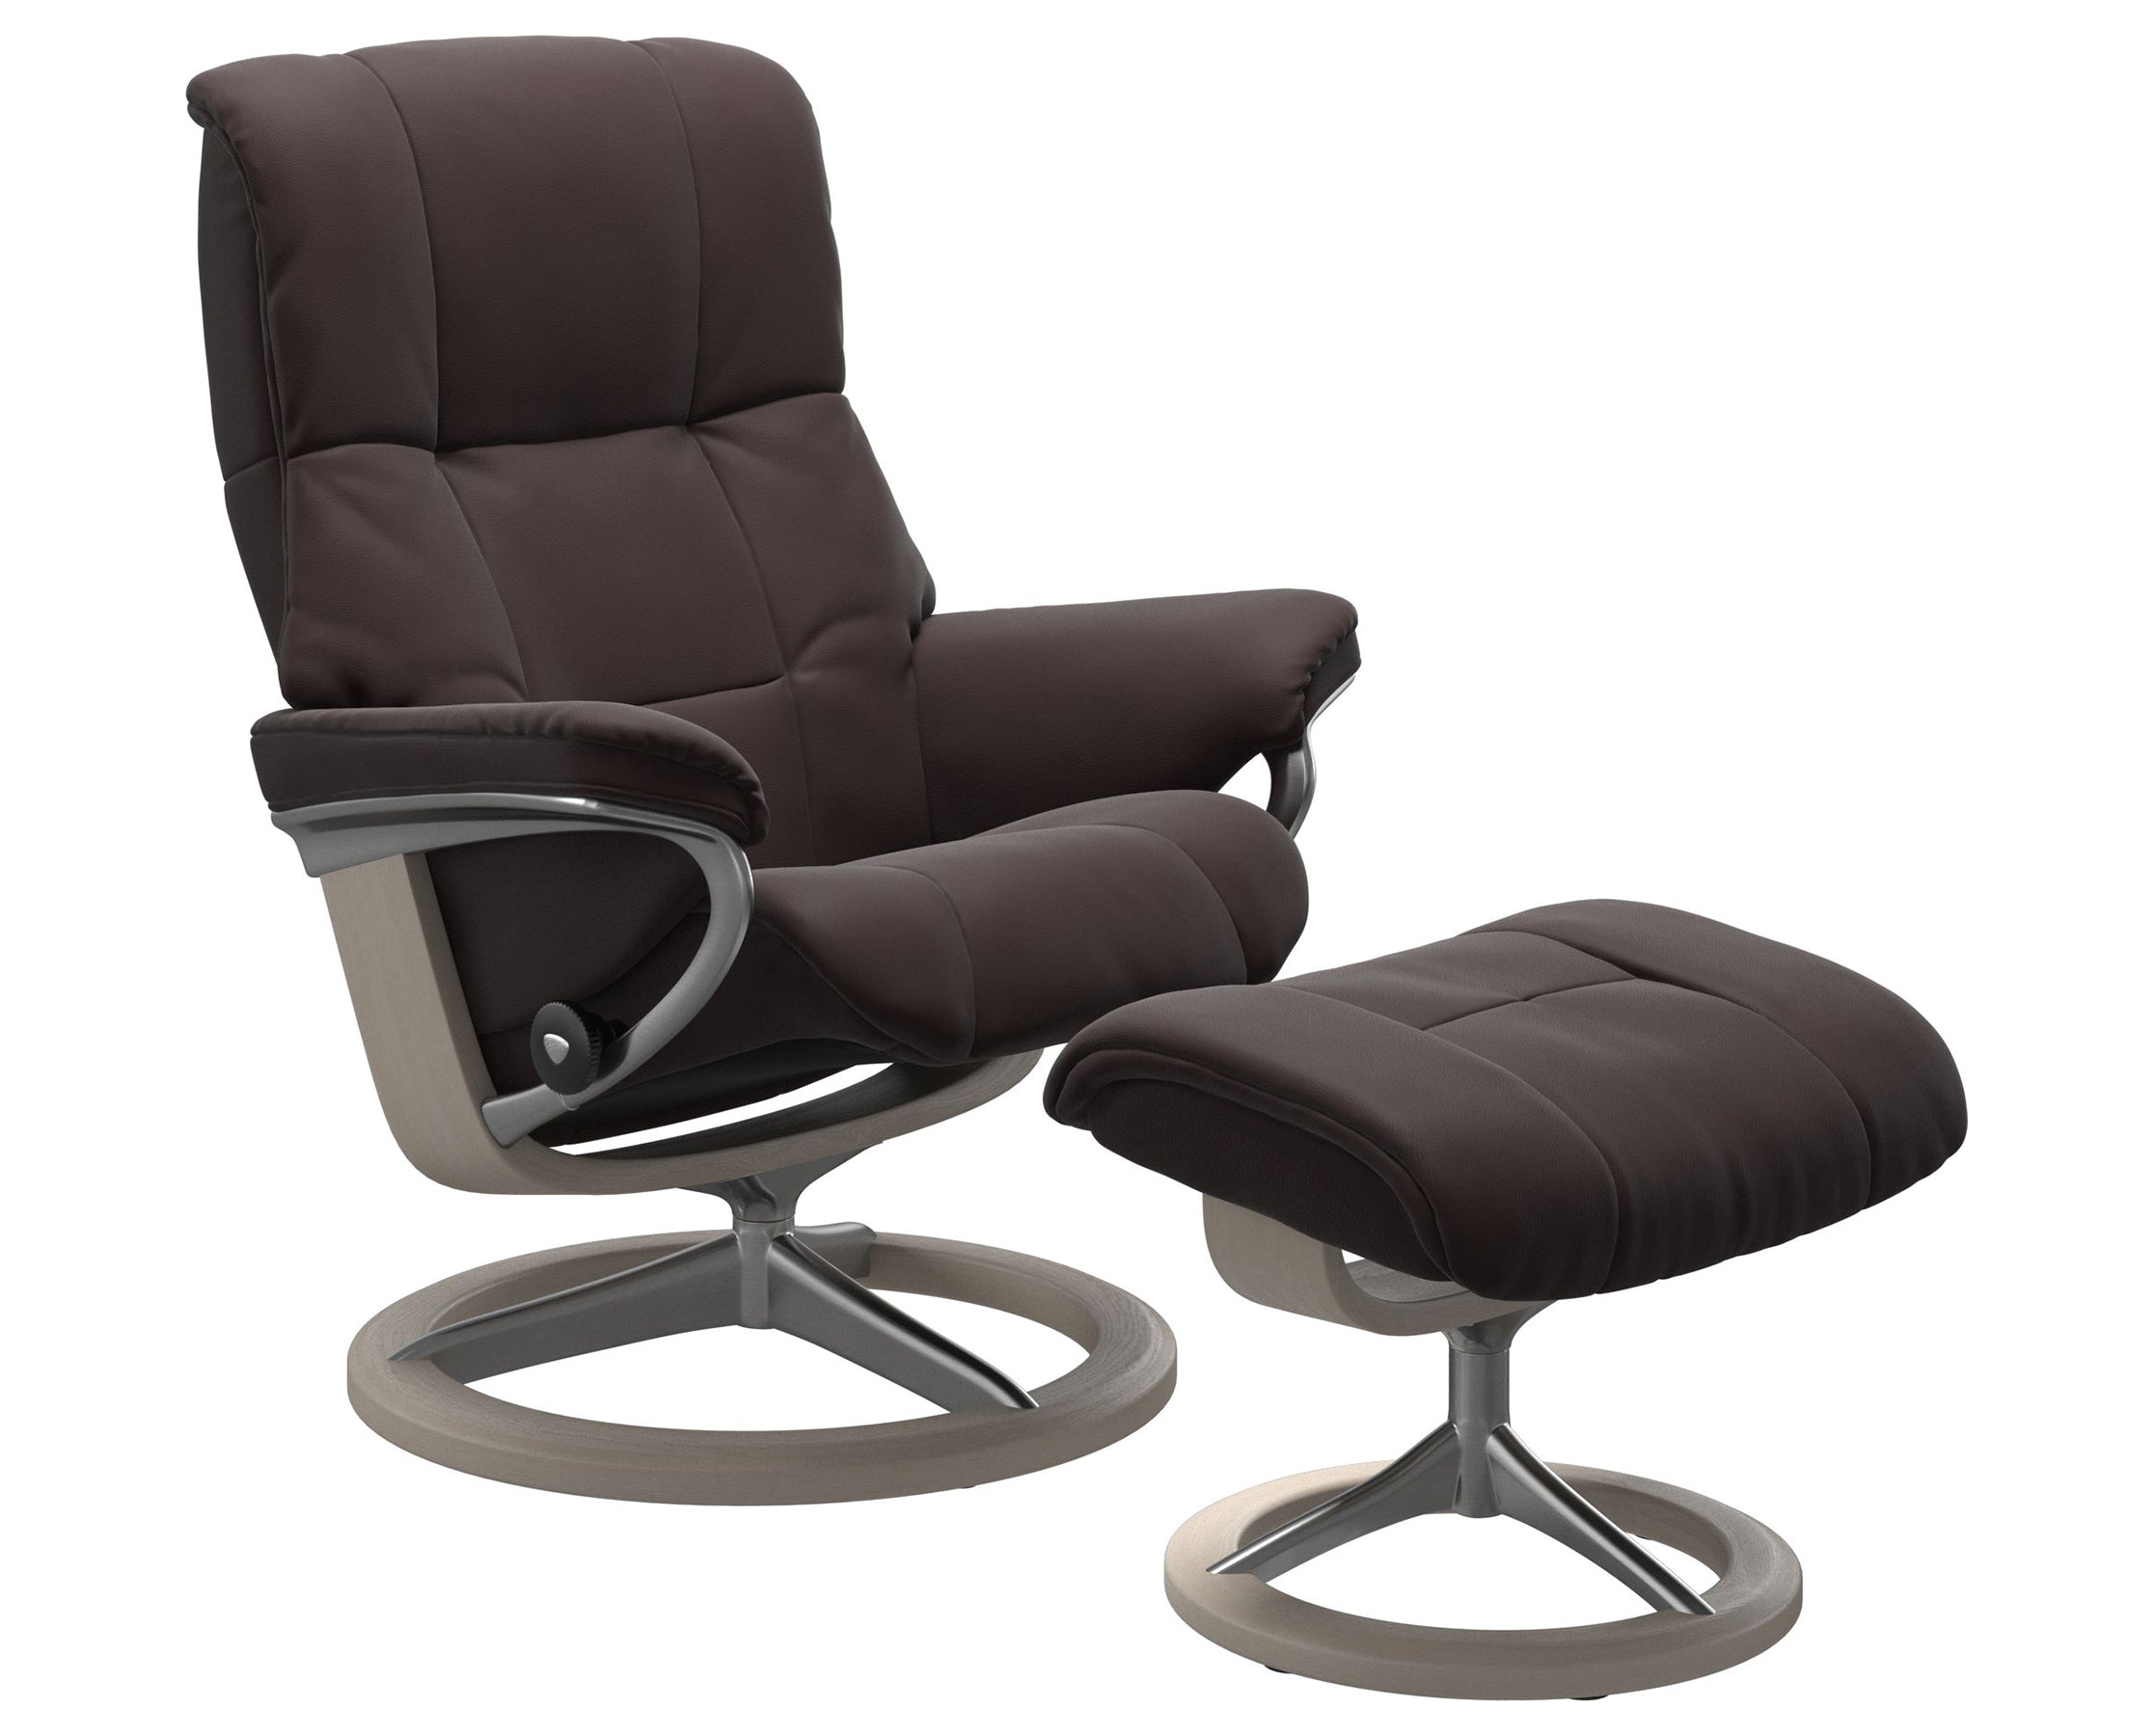 Paloma Leather Chocolate S/M/L and Whitewash Base | Stressless Mayfair Signature Recliner | Valley Ridge Furniture